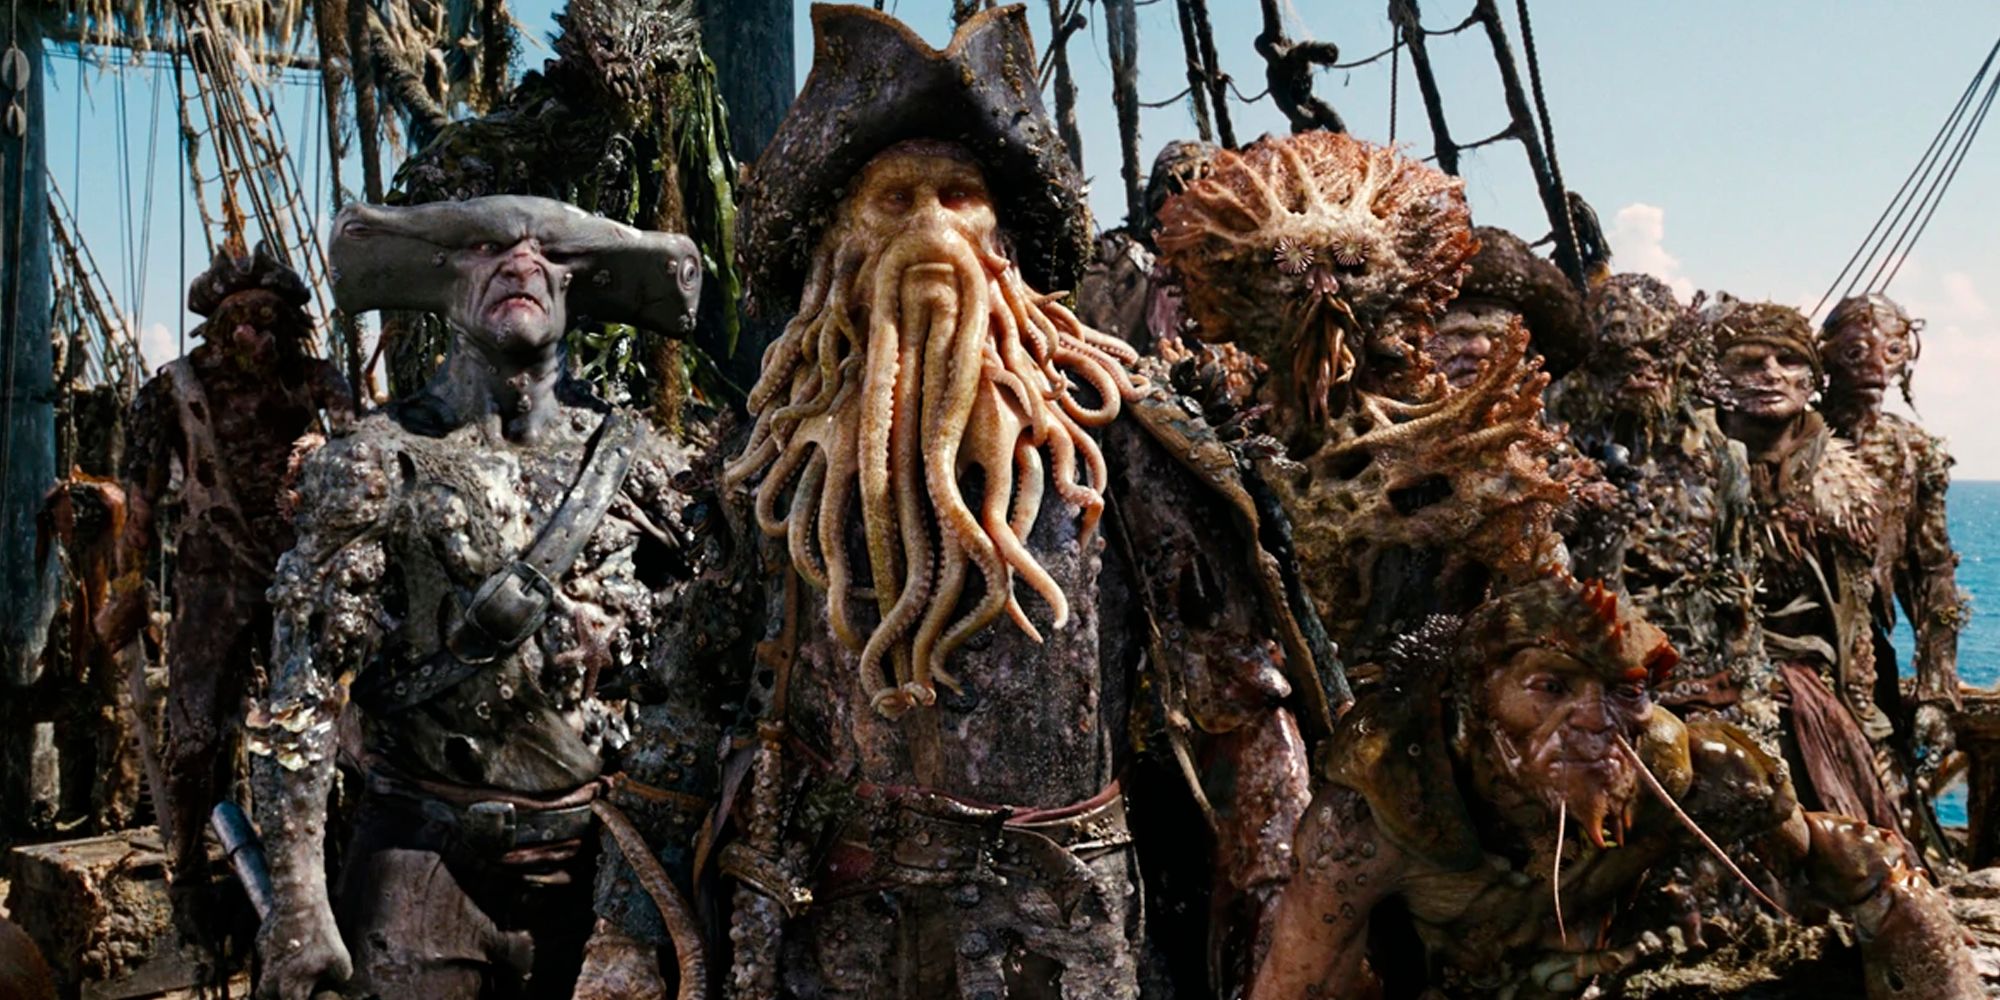 Bill Nighy as Davy Jones the Captain of the Flying Dutchman in Pirates of the Caribbean and his crew